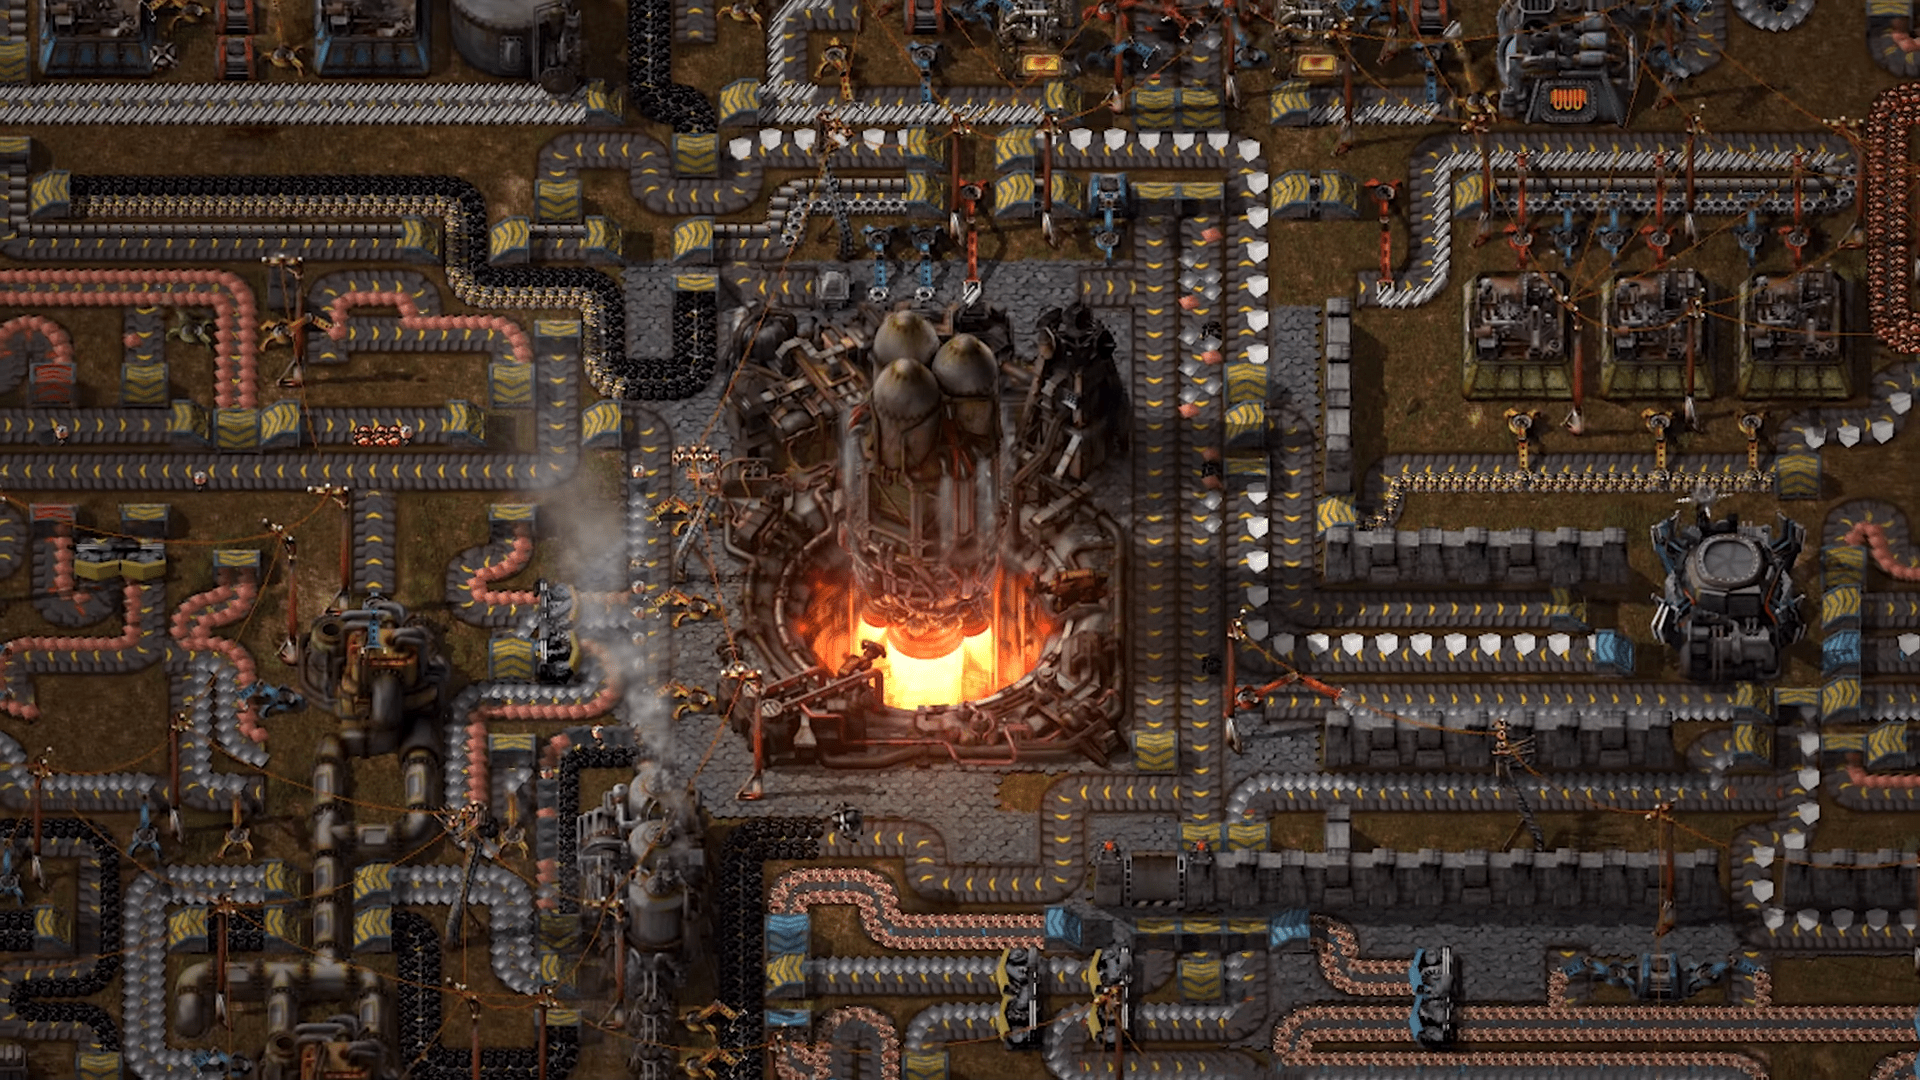 ‘Factorio’ Finally Has An Official 1.0 Release Date, Will Continue To Receive Content And Polish Afterwards